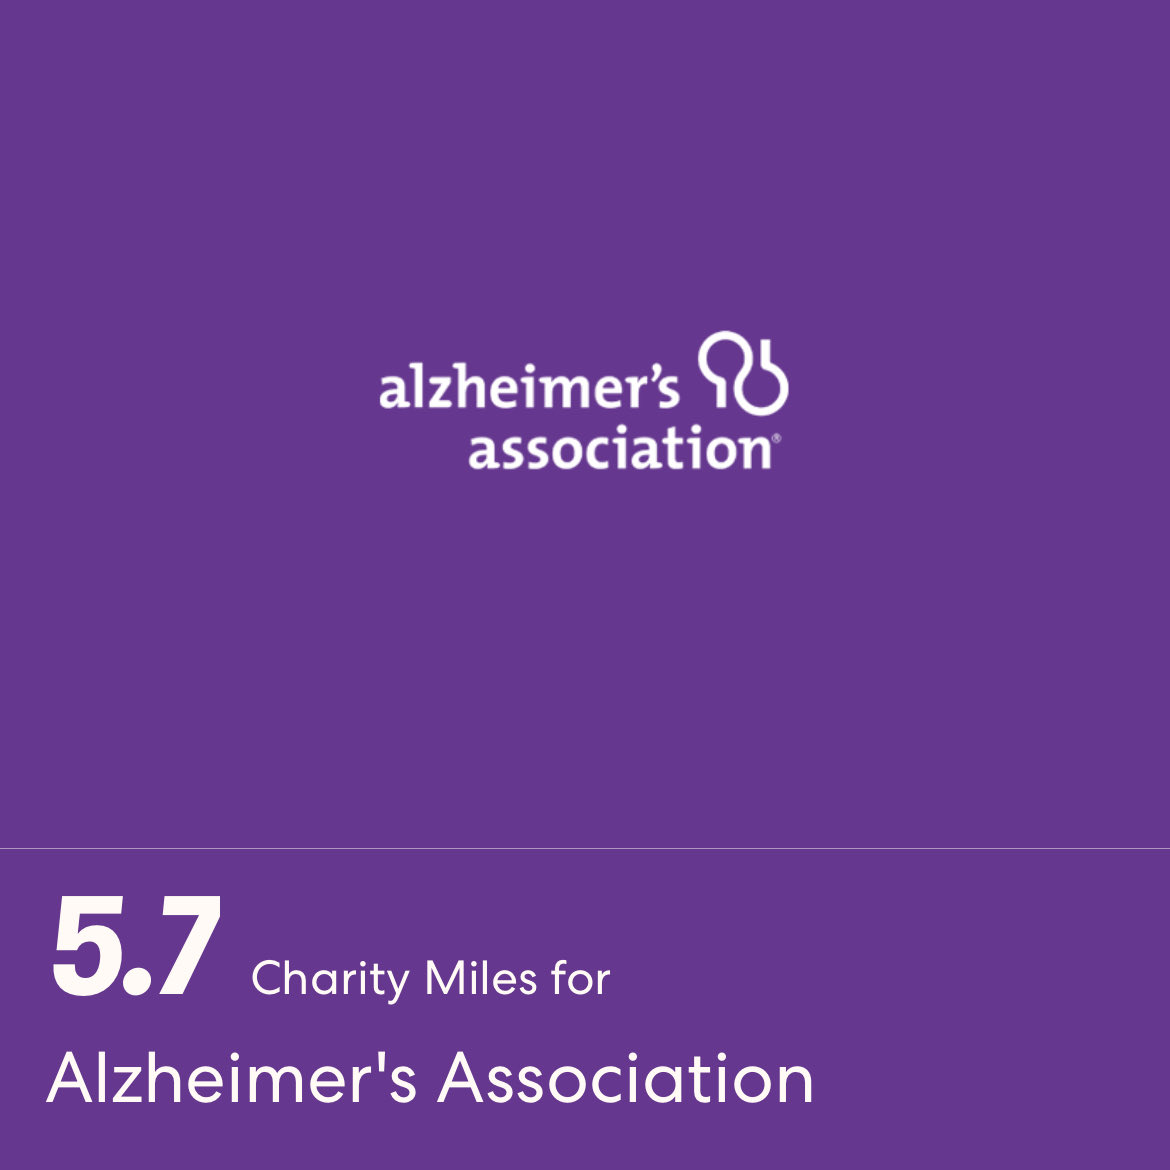 5.7 Charity Miles for Alzheimer's Association. I’d be grateful for your support. If you’re in a position to do so, please click here to sponsor me. miles.app.link/e/xyrYBy0U3tb